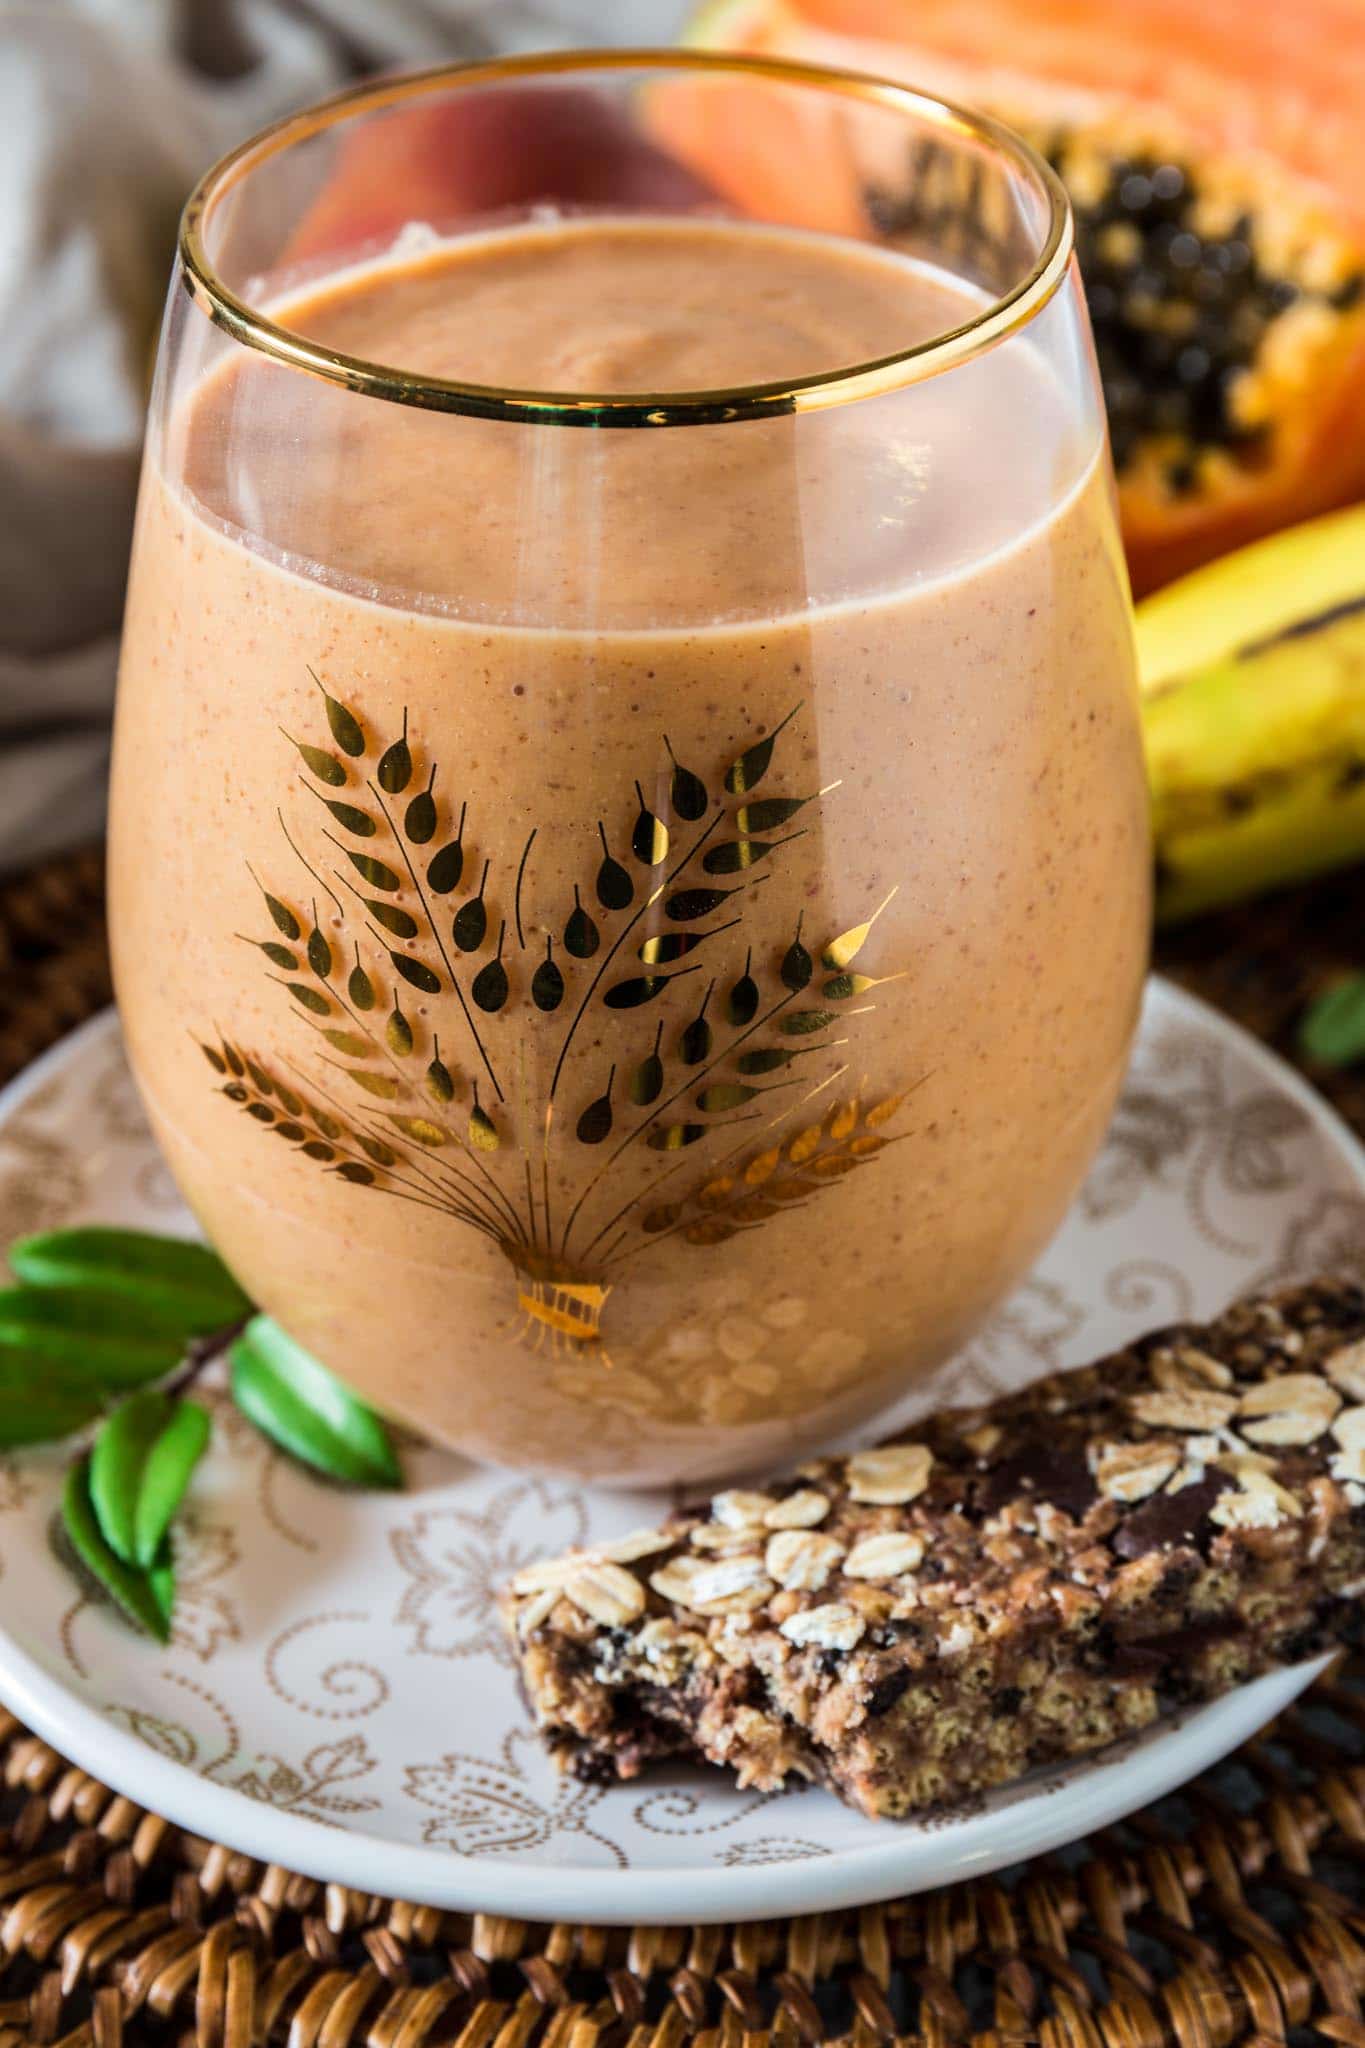 Holiday Detox Smoothie | www.oliviascuisine.com | Who said a detox smoothie has to taste awful? This delicious version is packed with nutrients and tastes like tropical paradise!